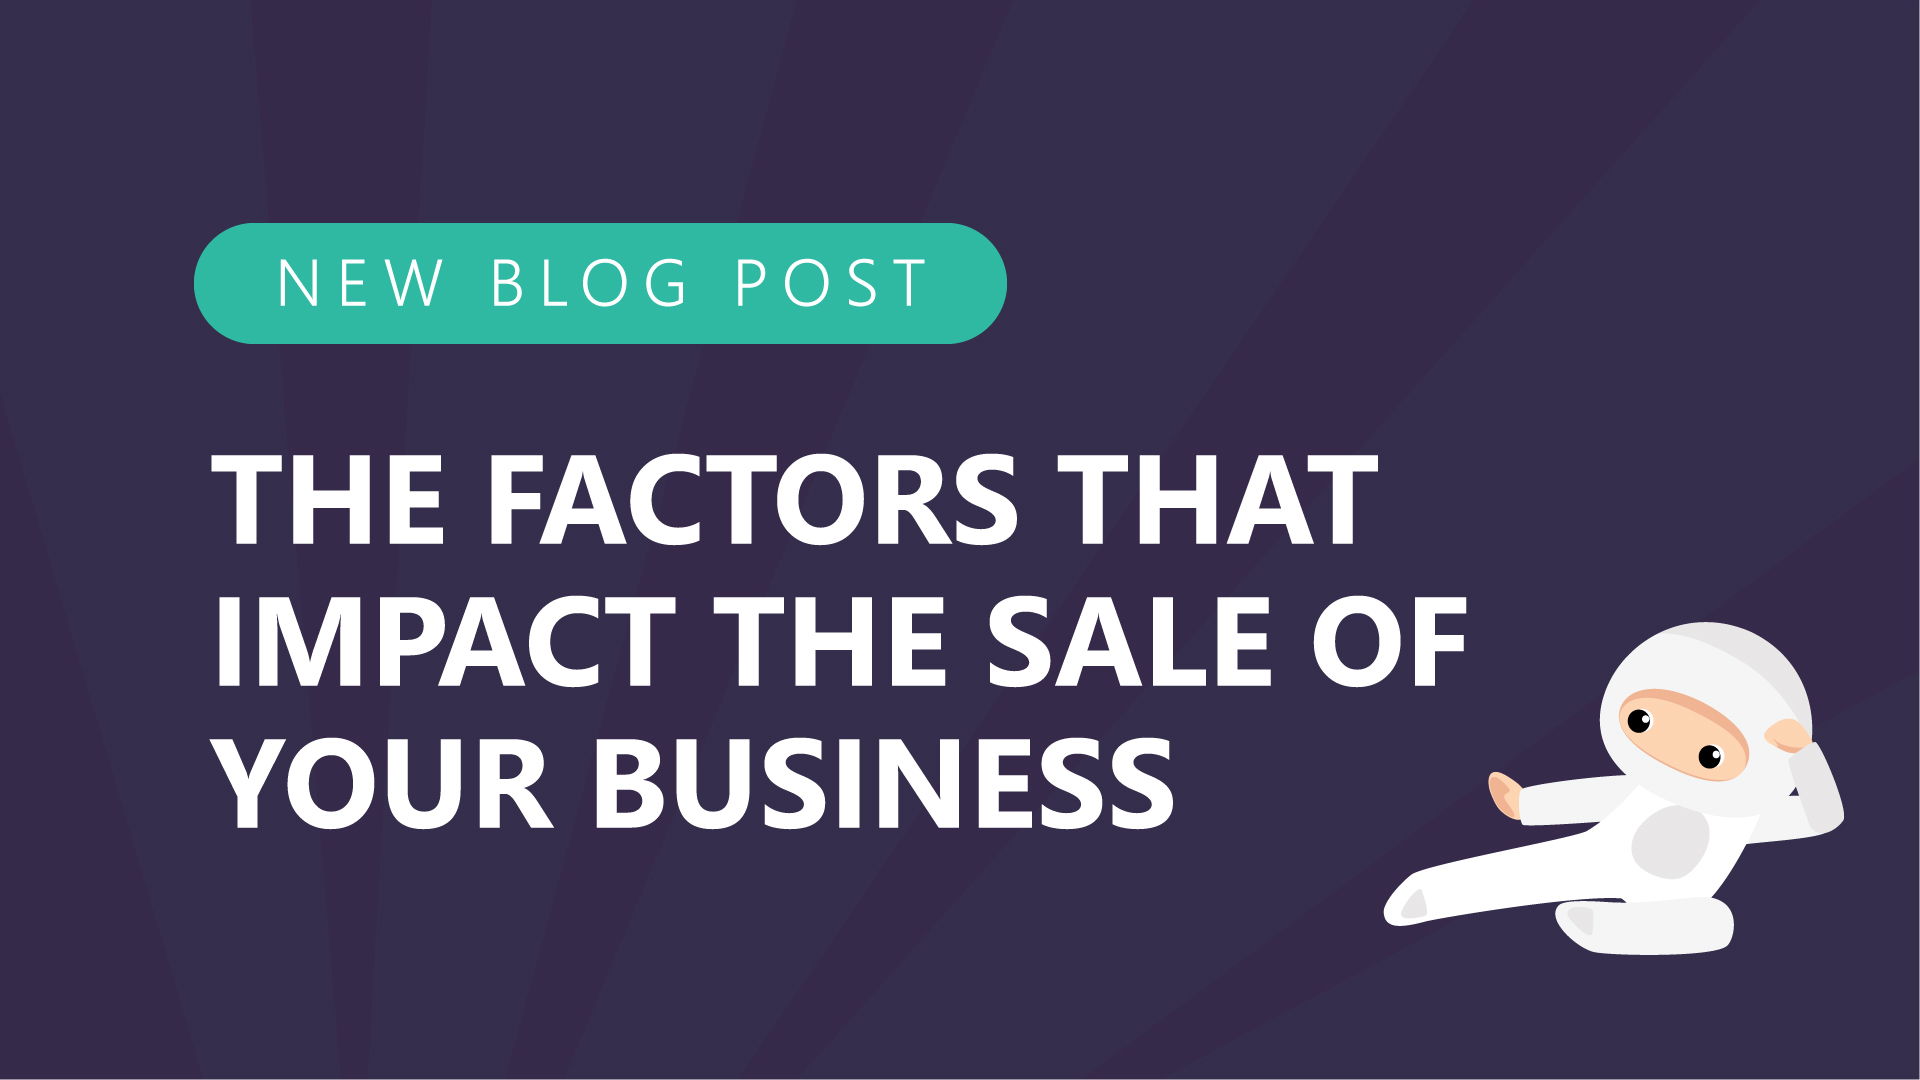 7-The-Factors-that-Impact-the-Sale-of-Your-Business.jpg